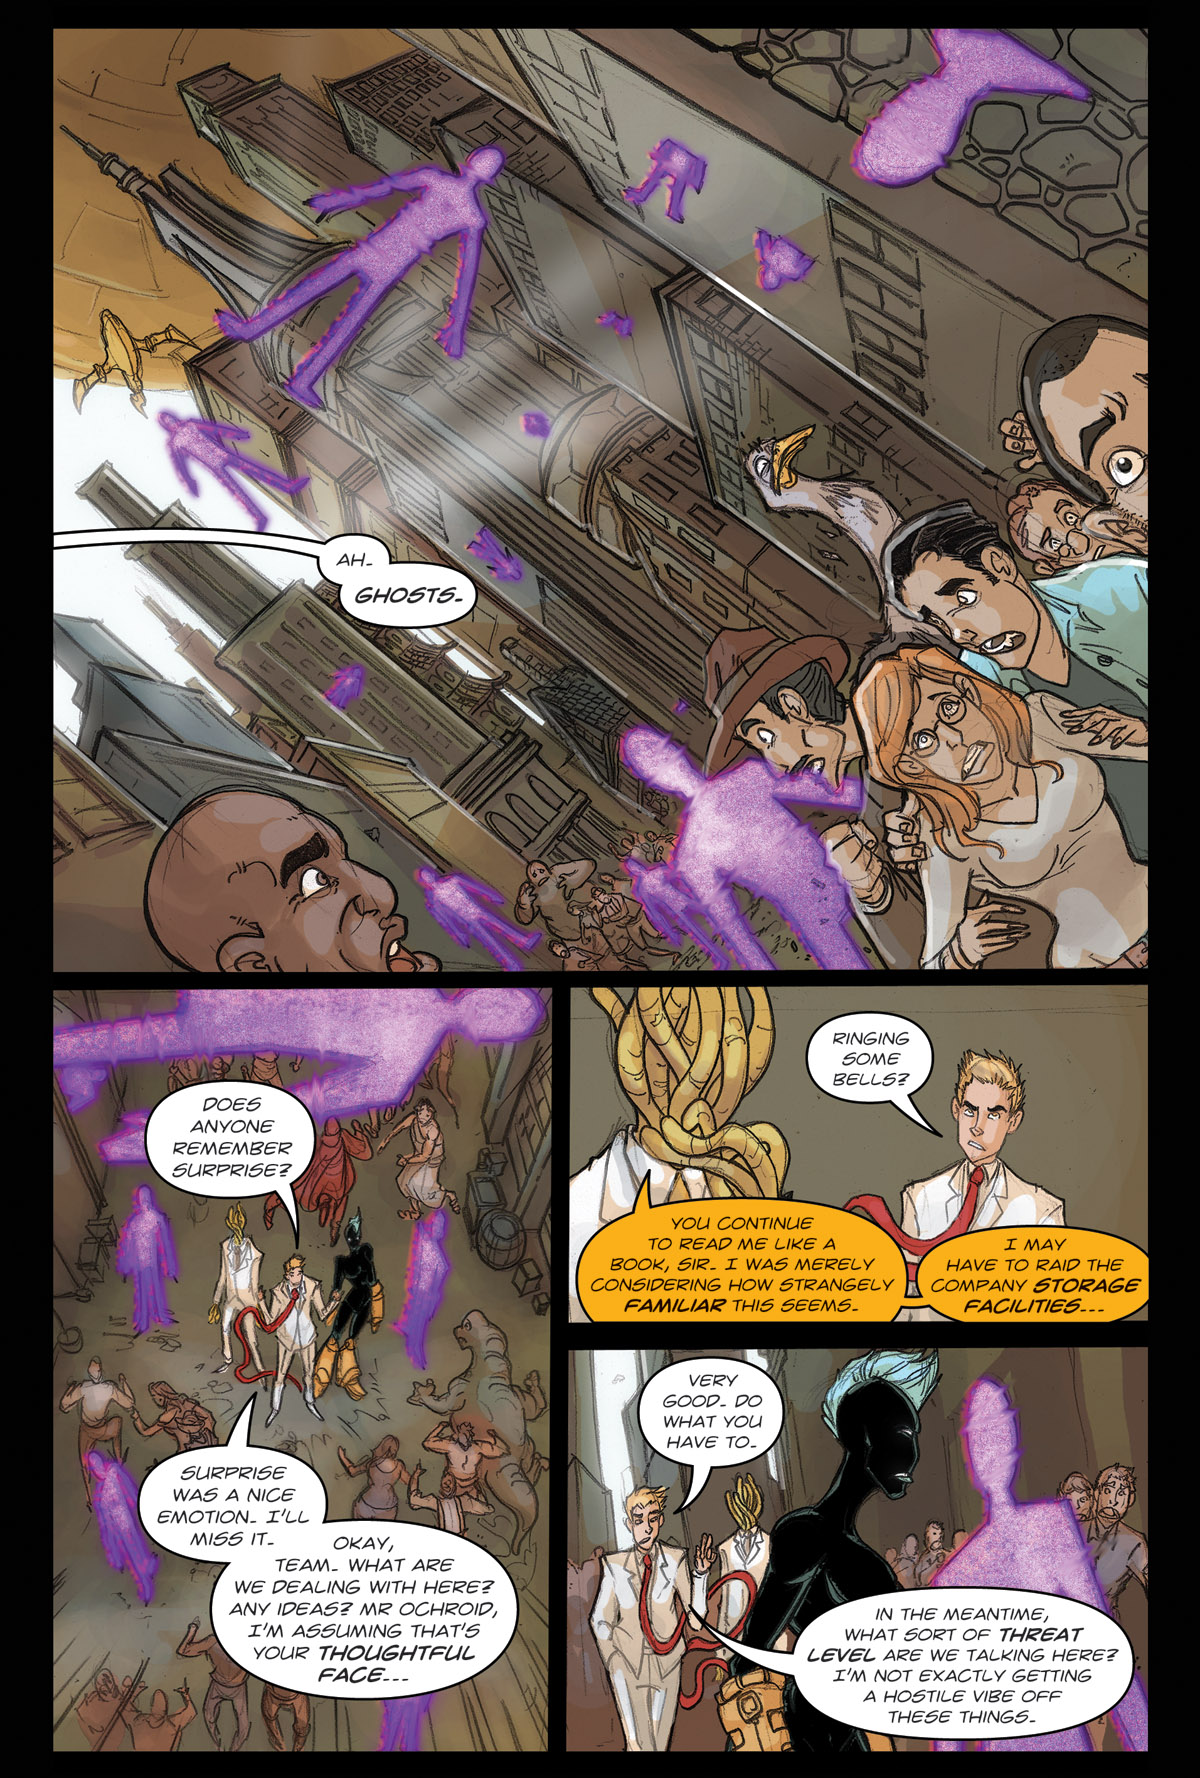 Afterlife Inc. | Near Life | Page 2